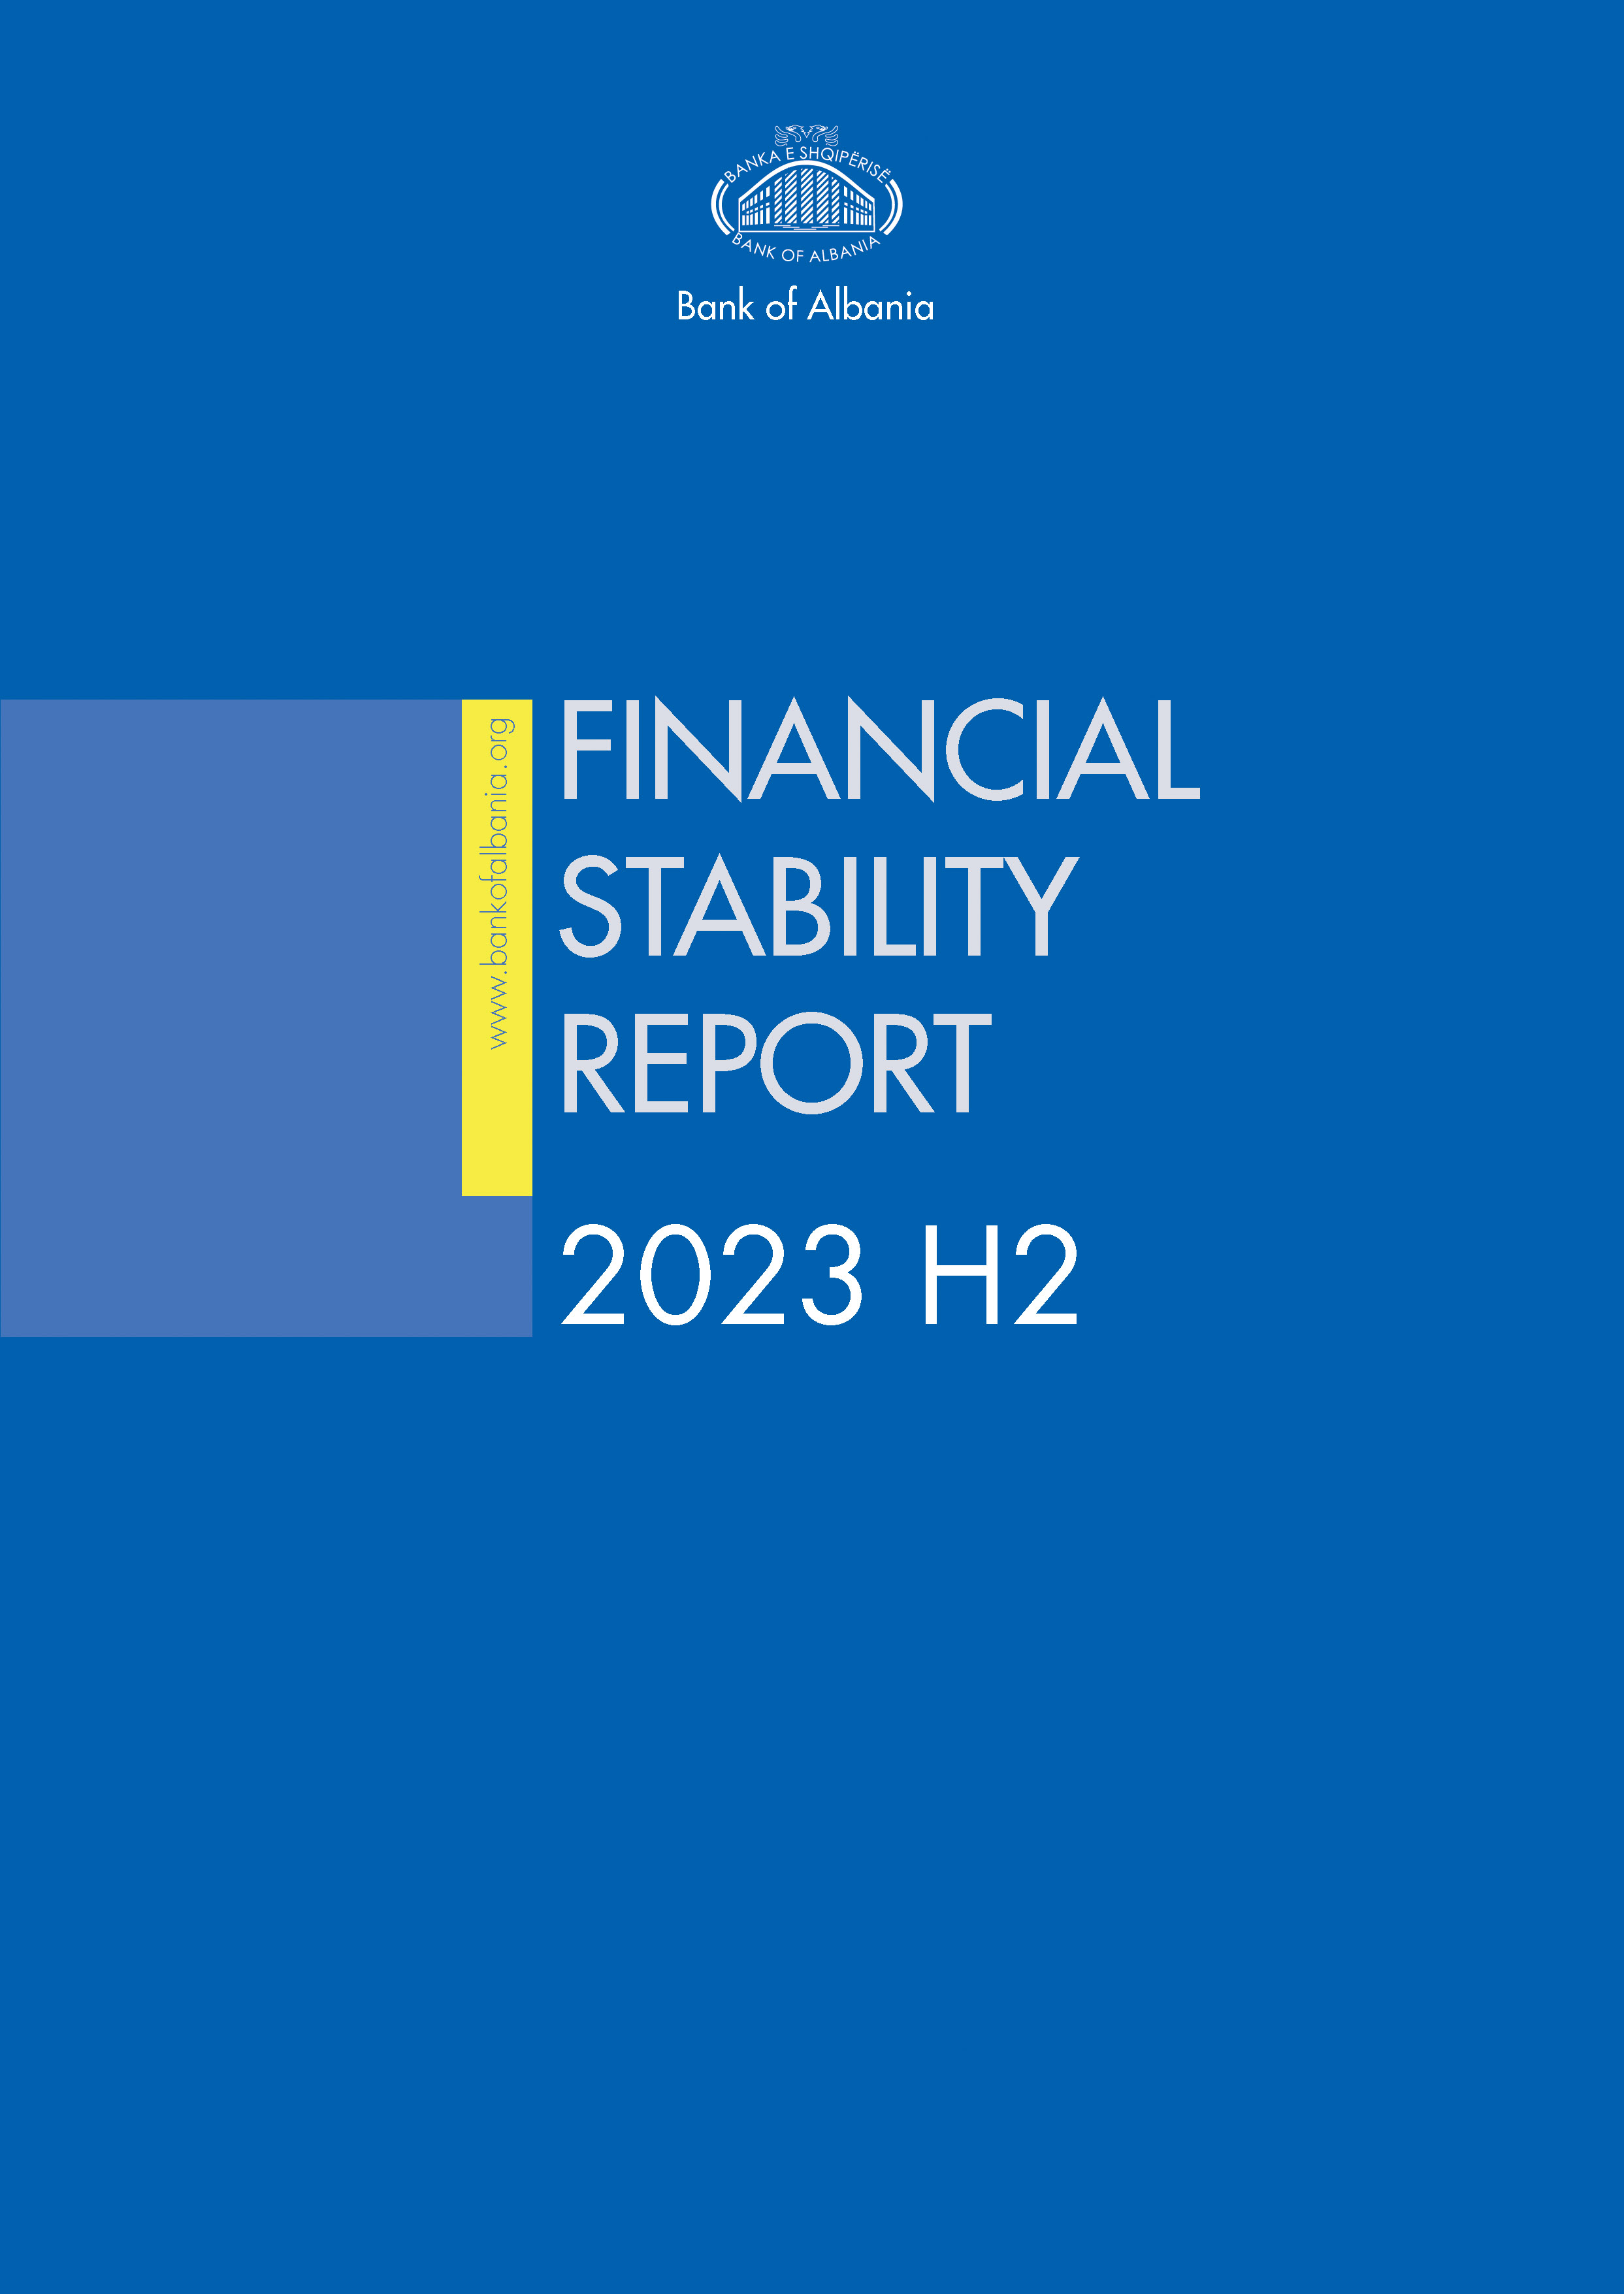 Financial Stability Report - 2023 H1